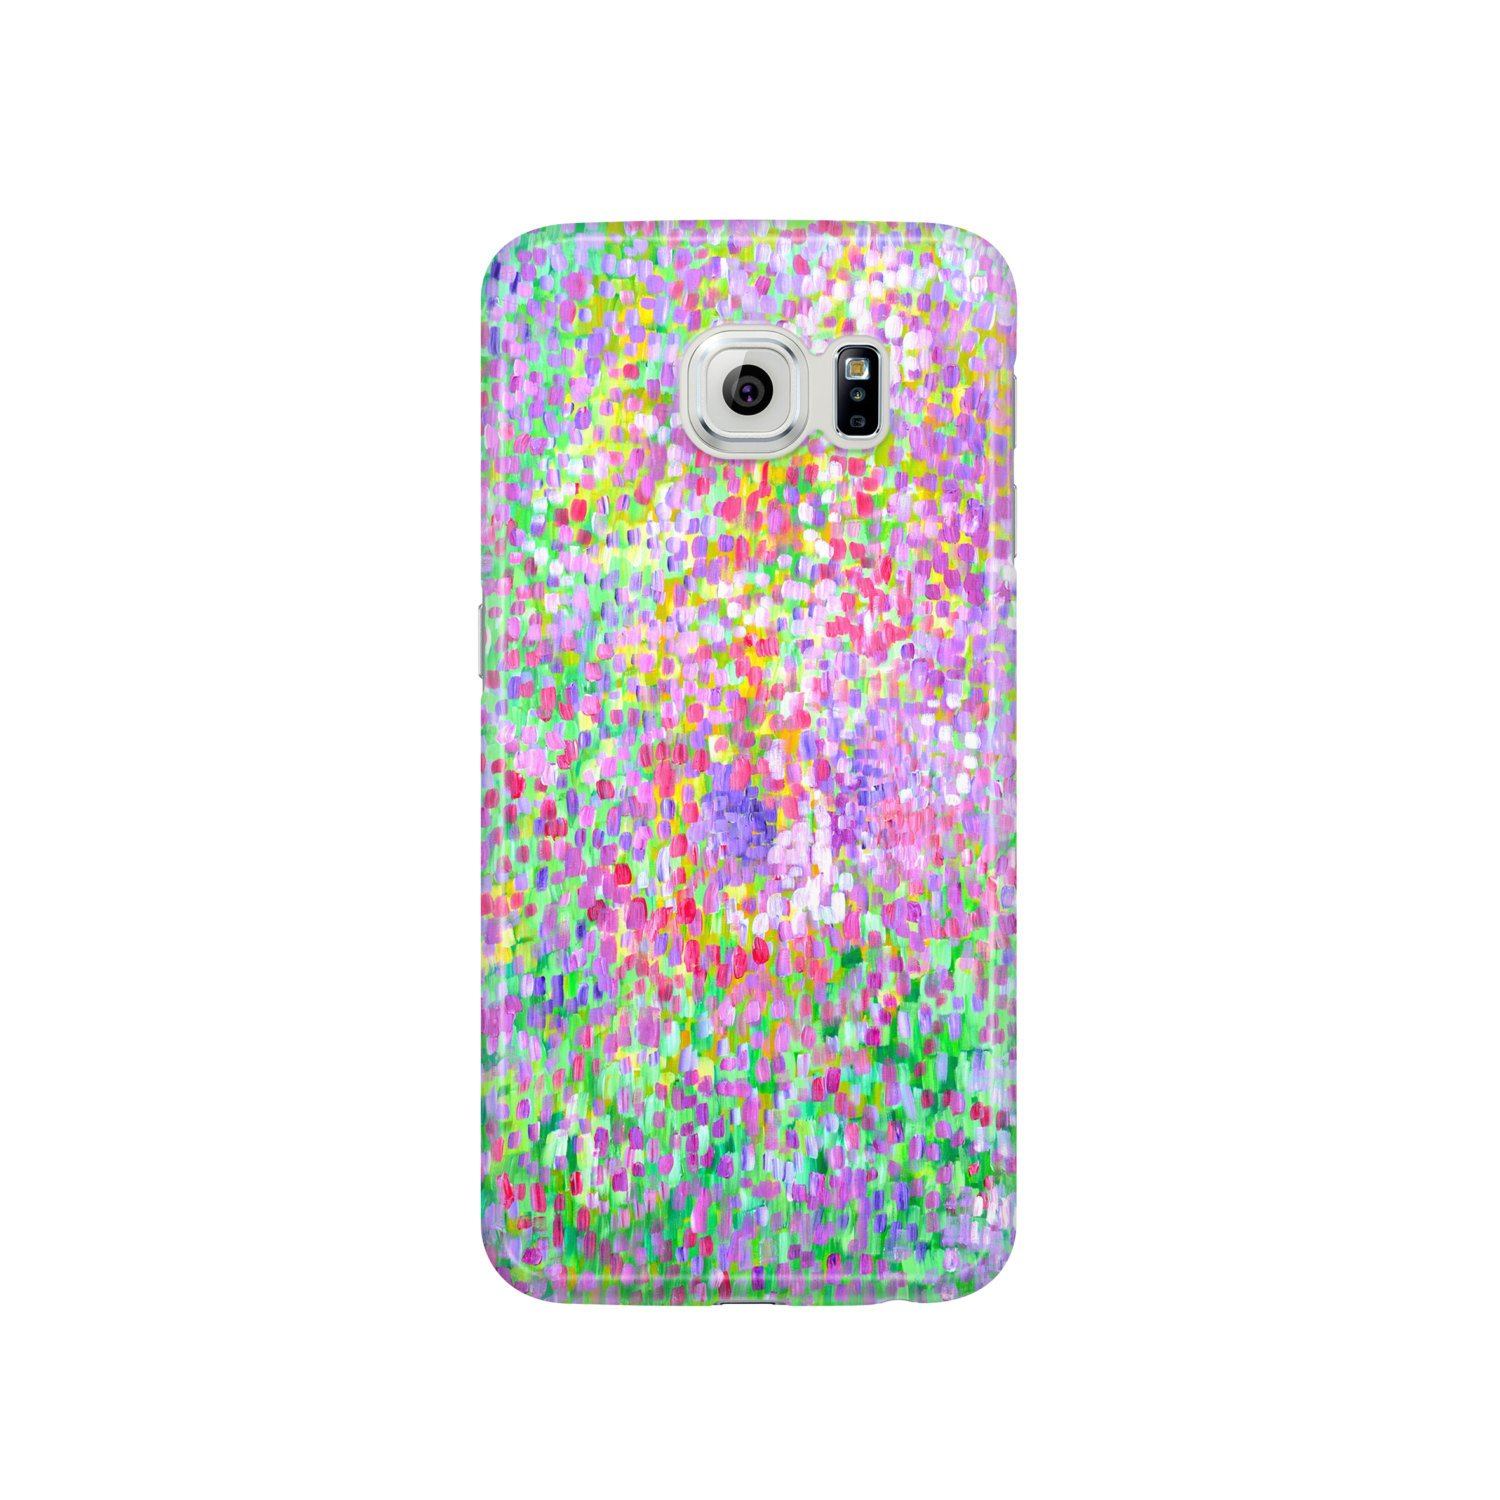 In Bloom Samsung Case - Louise Mead